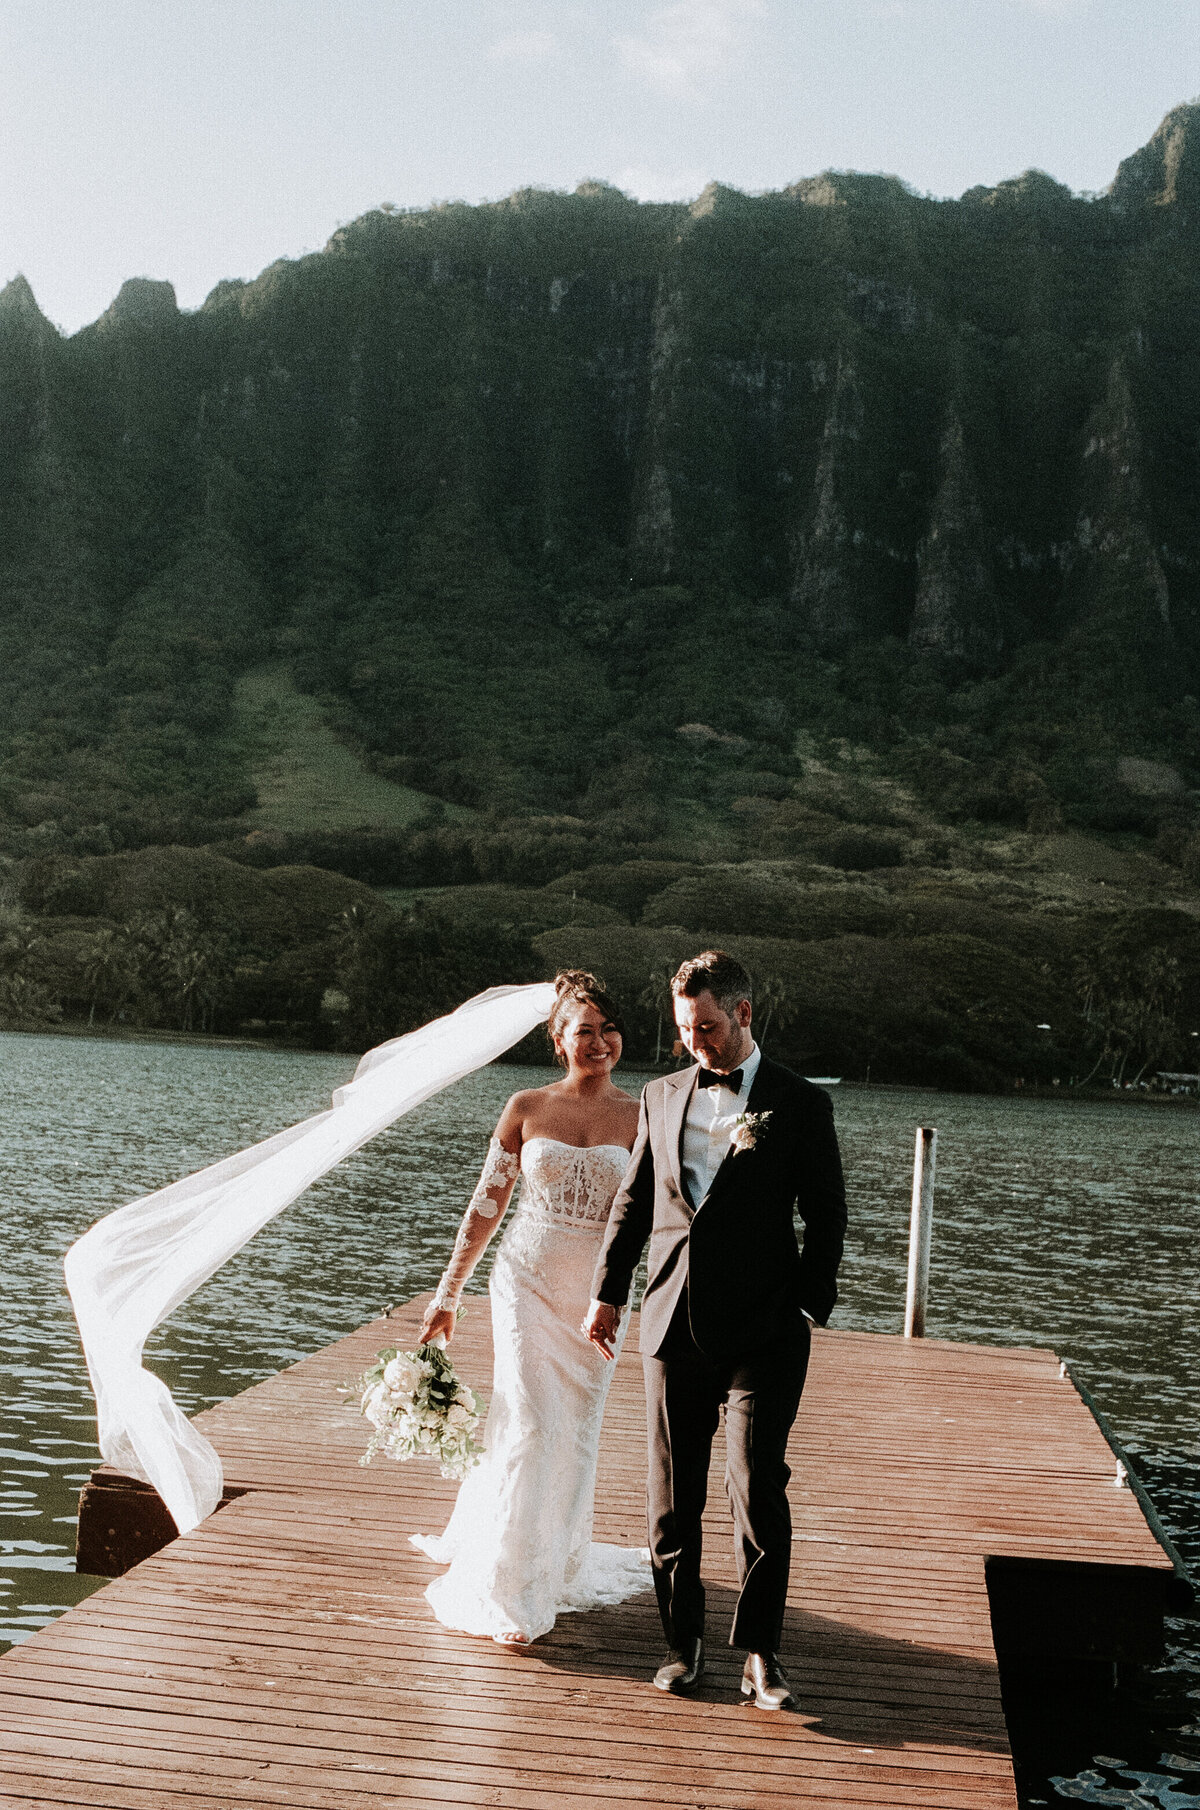 Elopement Photography, bride and groom walking on a dock with kualau mountains in the background while veil flows in the wind